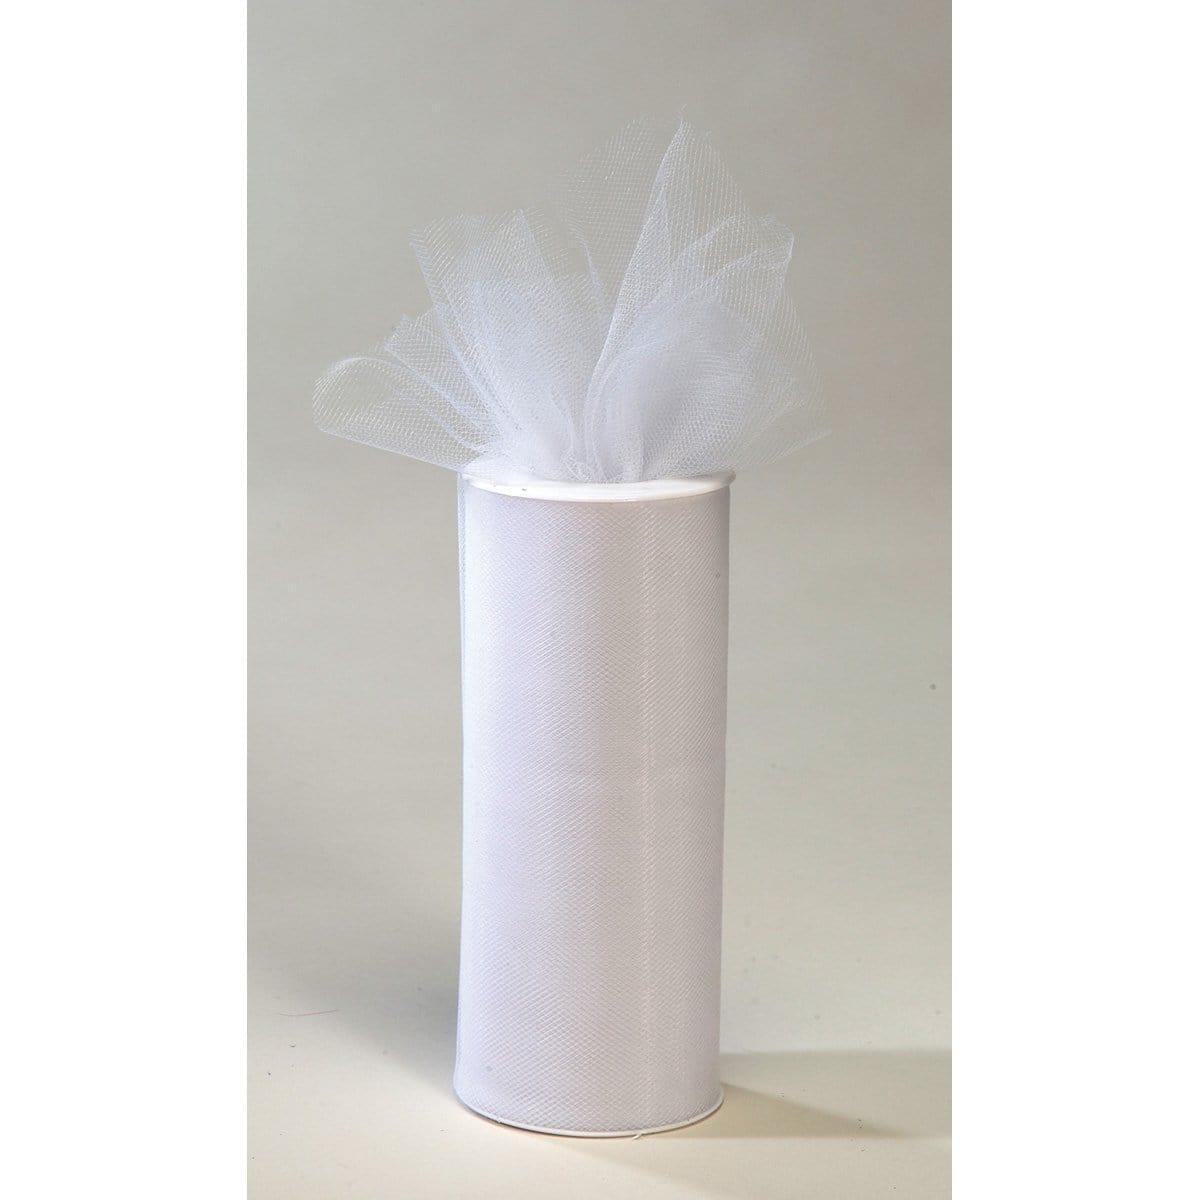 Buy Decorations Tulle Roll - White 6 in. x 25 yds sold at Party Expert